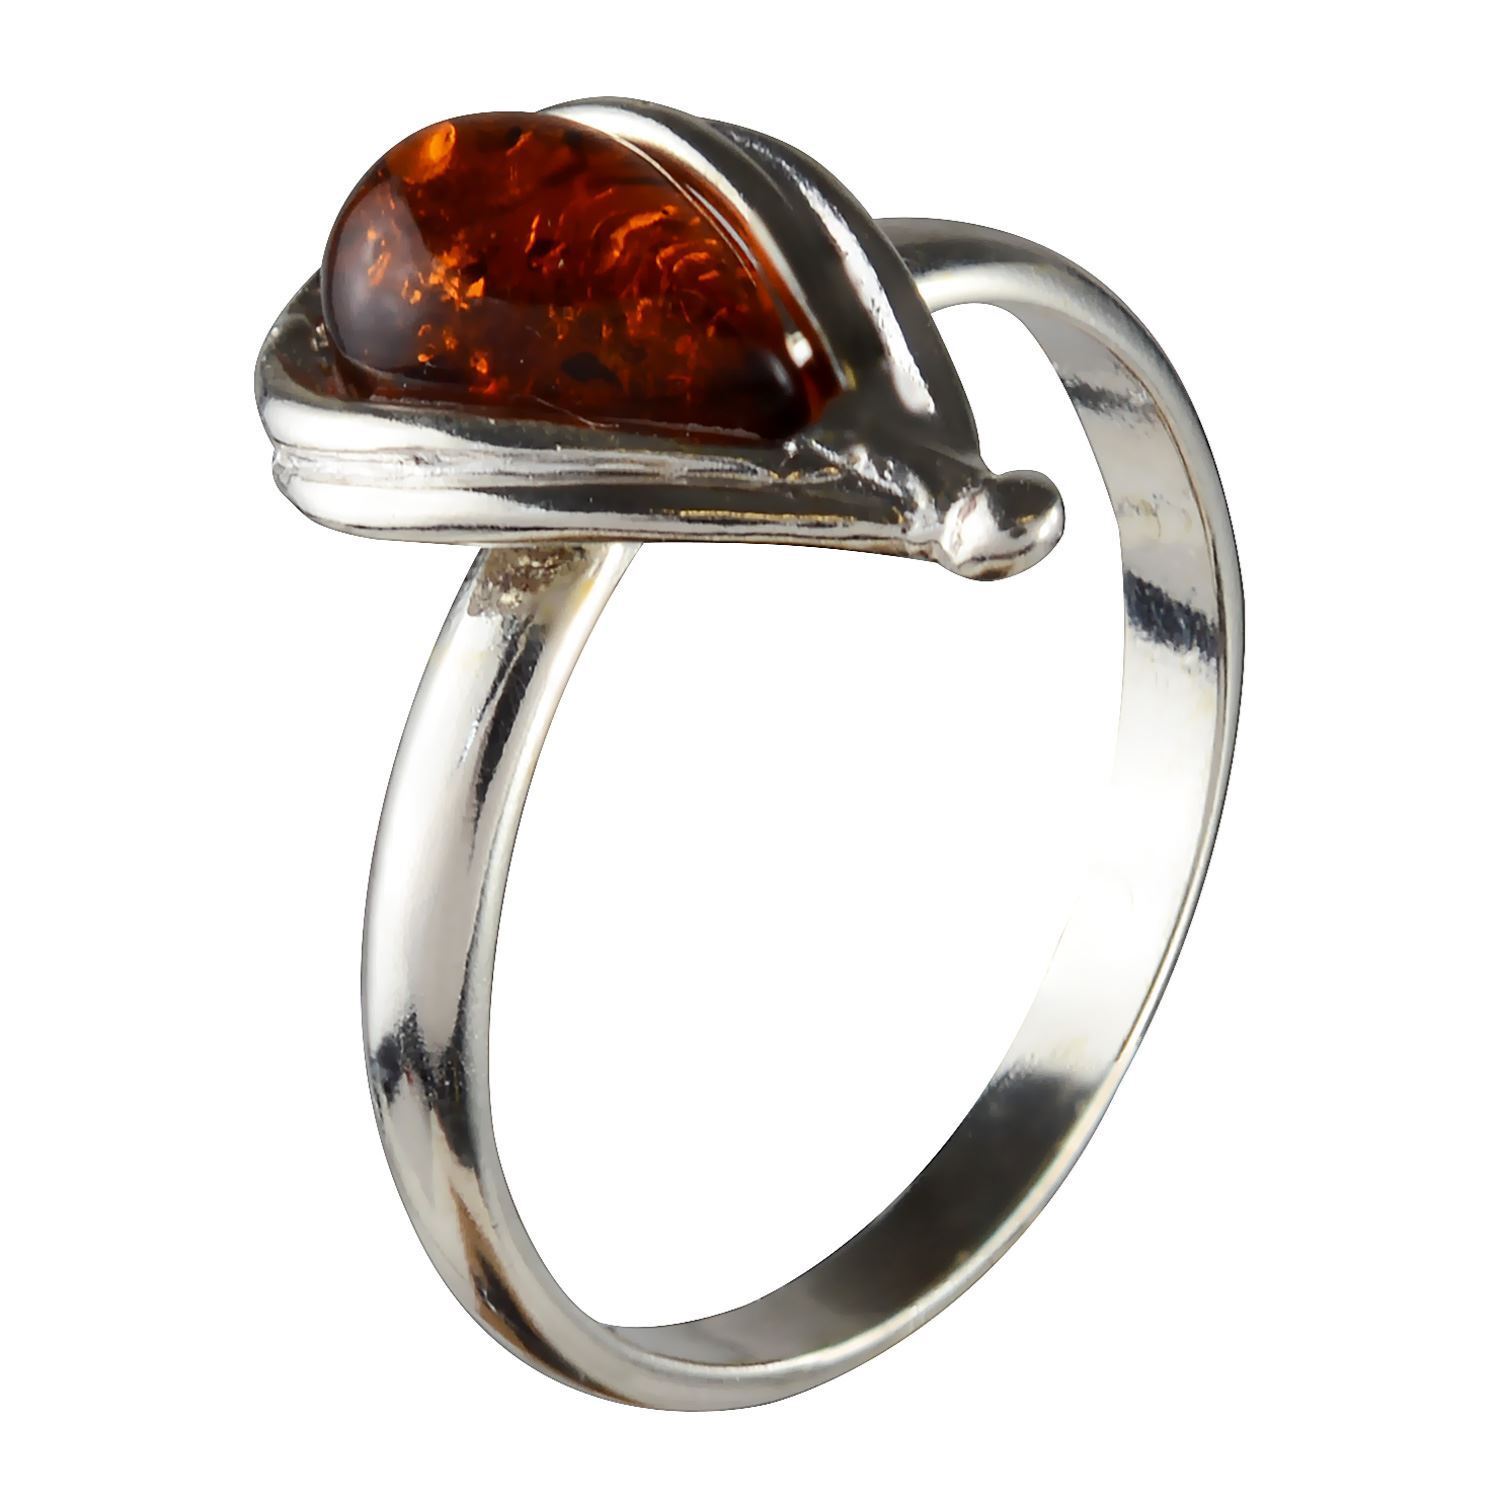 BALTIC BUTTERSCOTCH GREEN or HONEY AMBER STERLING SILVER HANDMADE SOLITAIRE RING